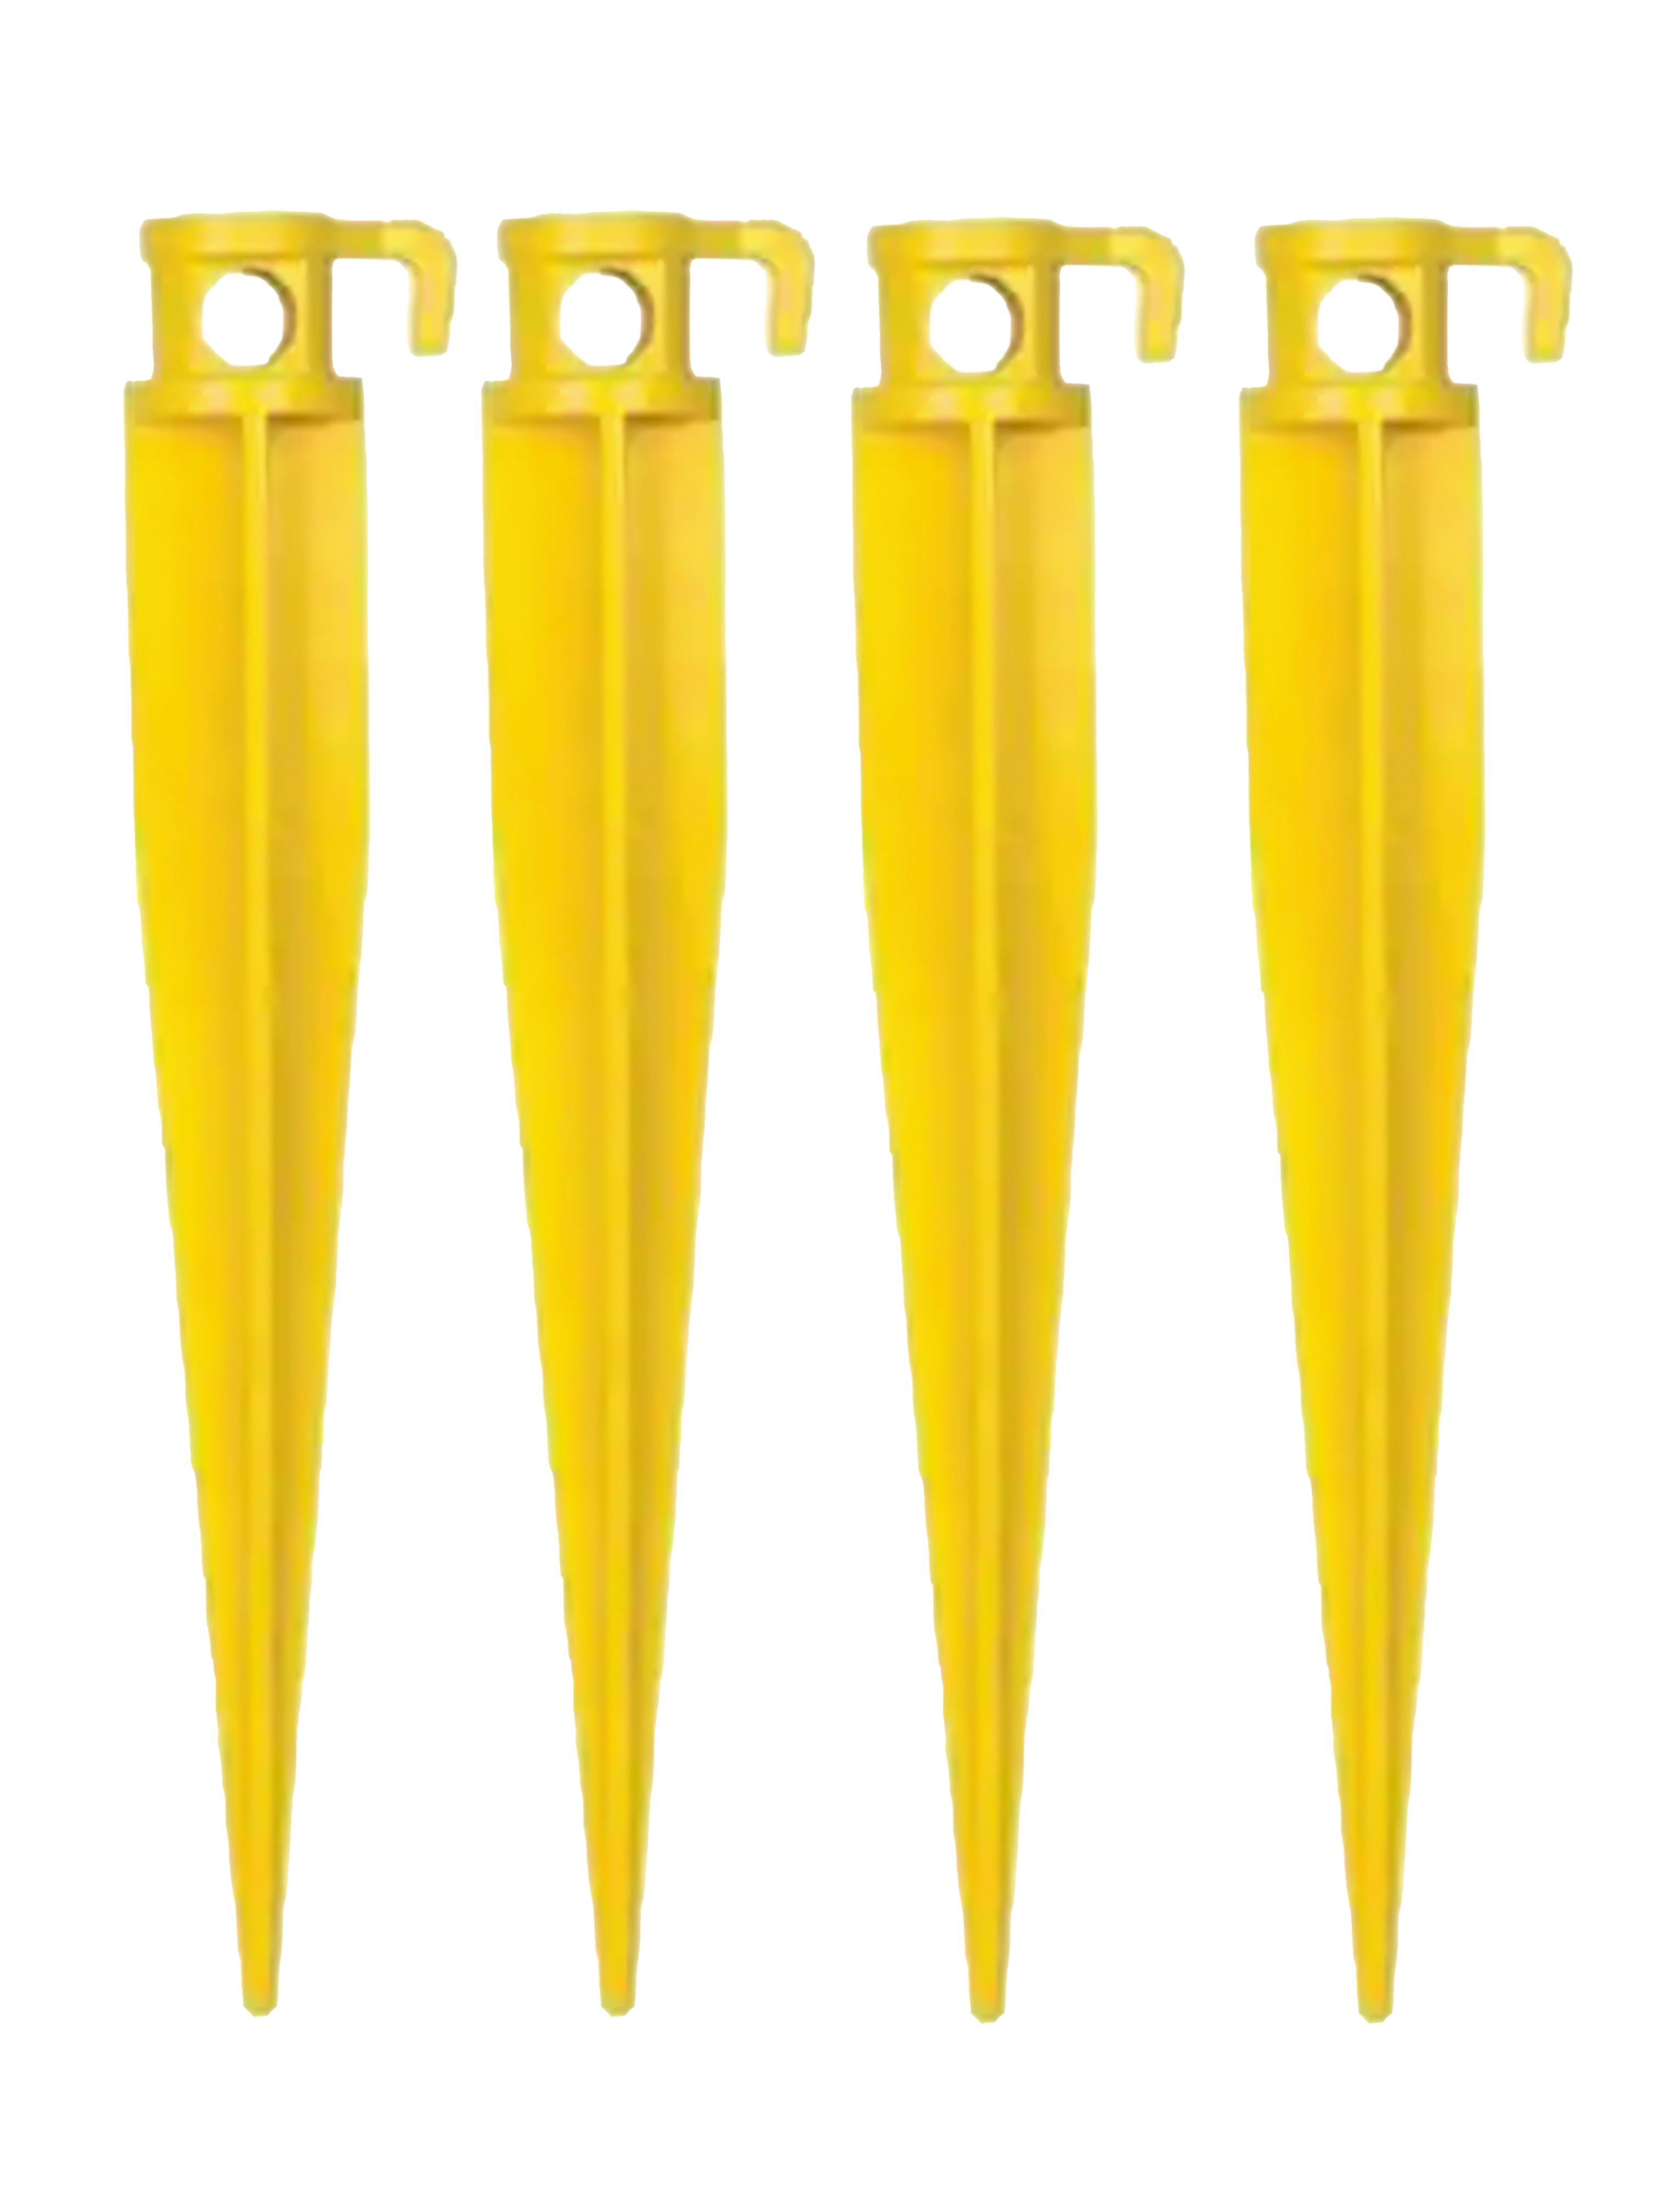 Plastic Anchor Stakes Set